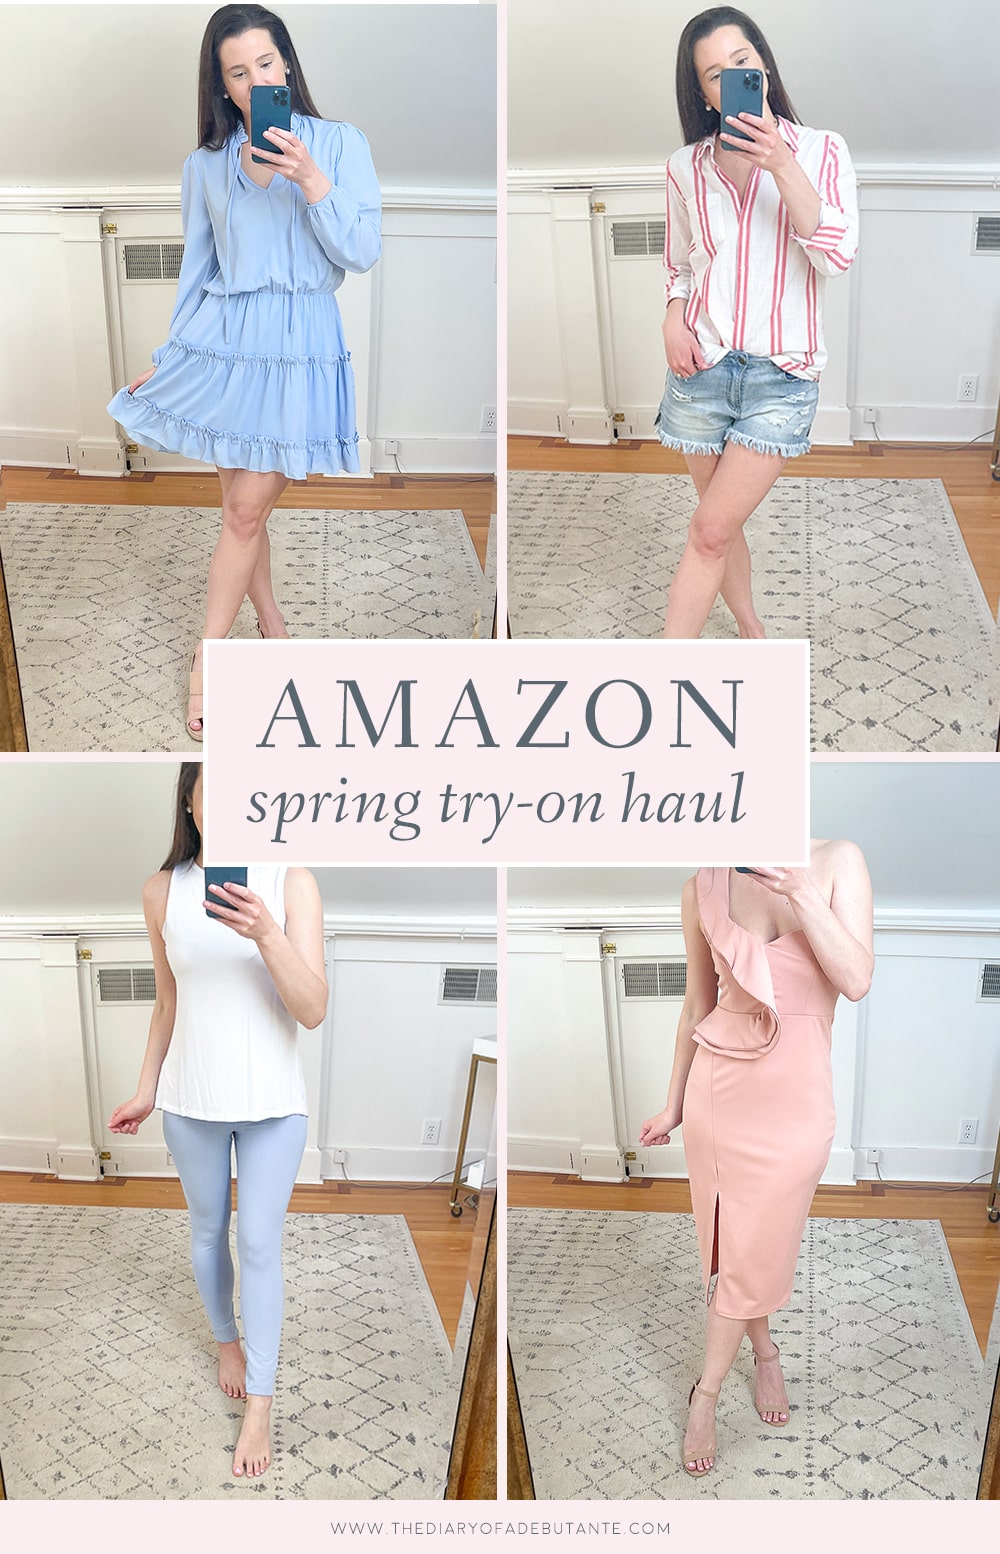 Affordable fashion blogger Stephanie Ziajka shares an Amazon spring try on haul on Diary of a Debutante